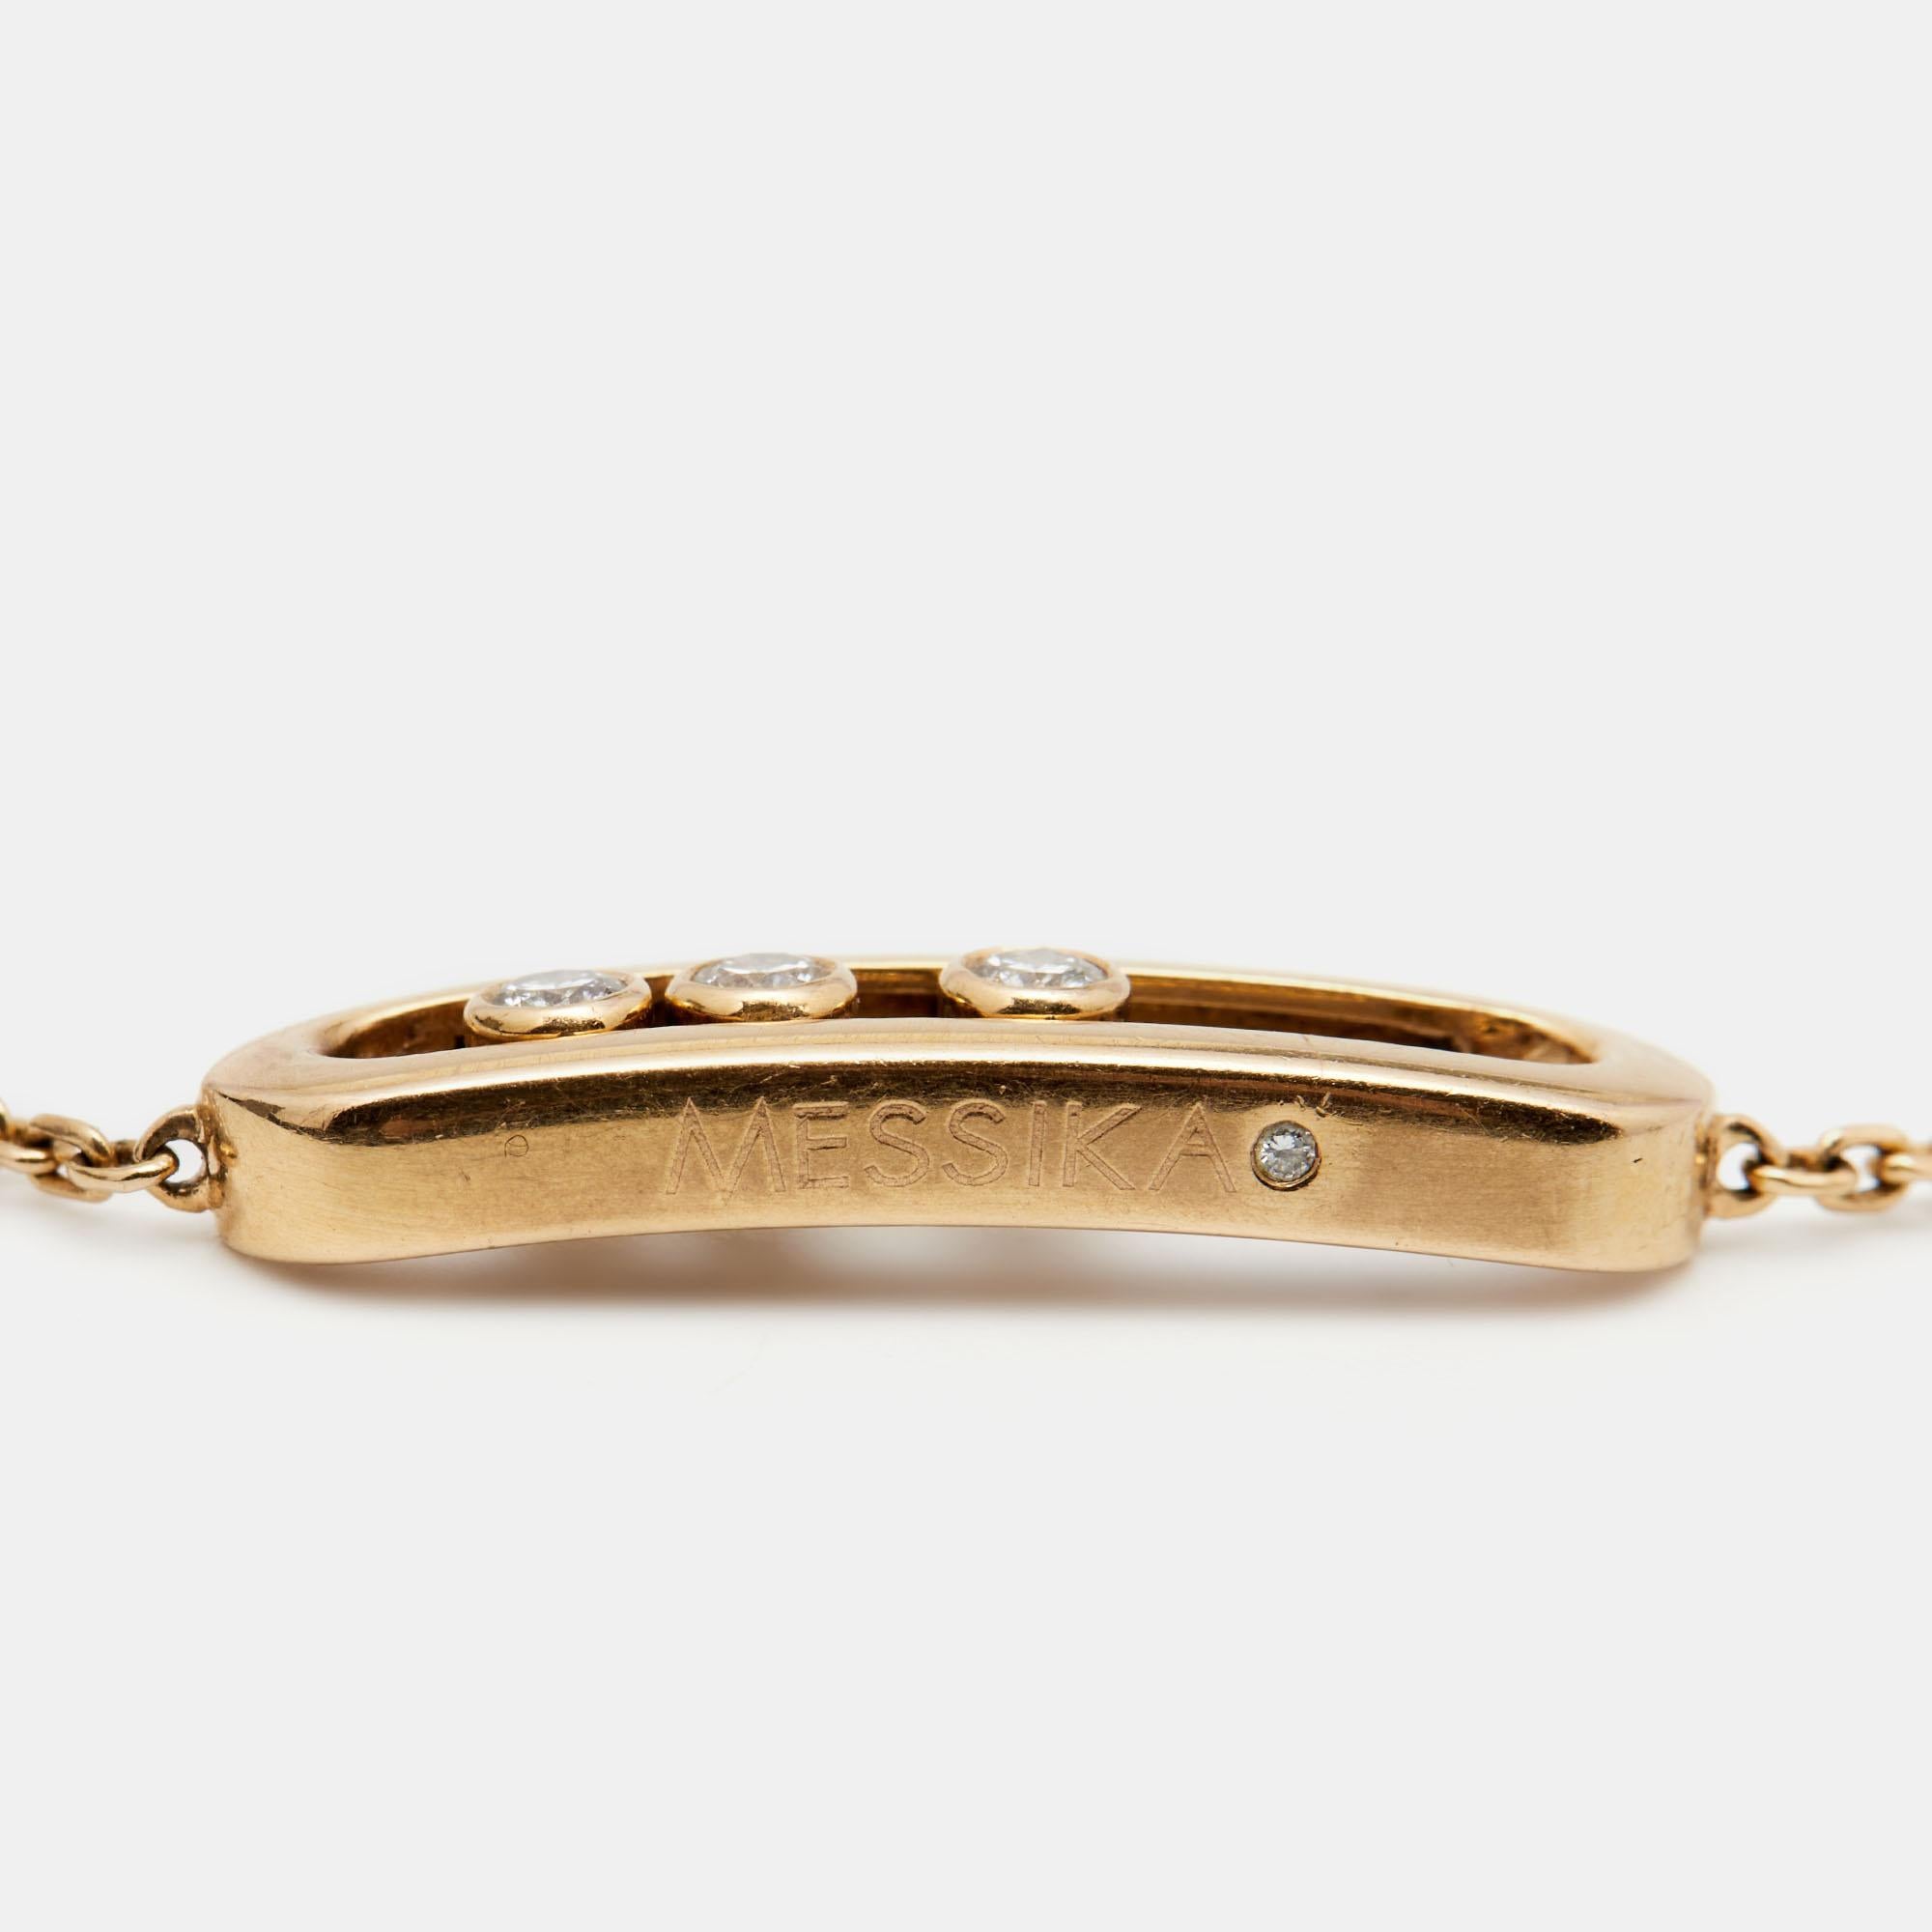 The Move is an iconic collection of house Messika, a line that embodies love and romance through three moving diamonds set in simple designs. This beautiful bracelet is fully handcrafted from 18k rose gold into a minimal yet timeless silhouette